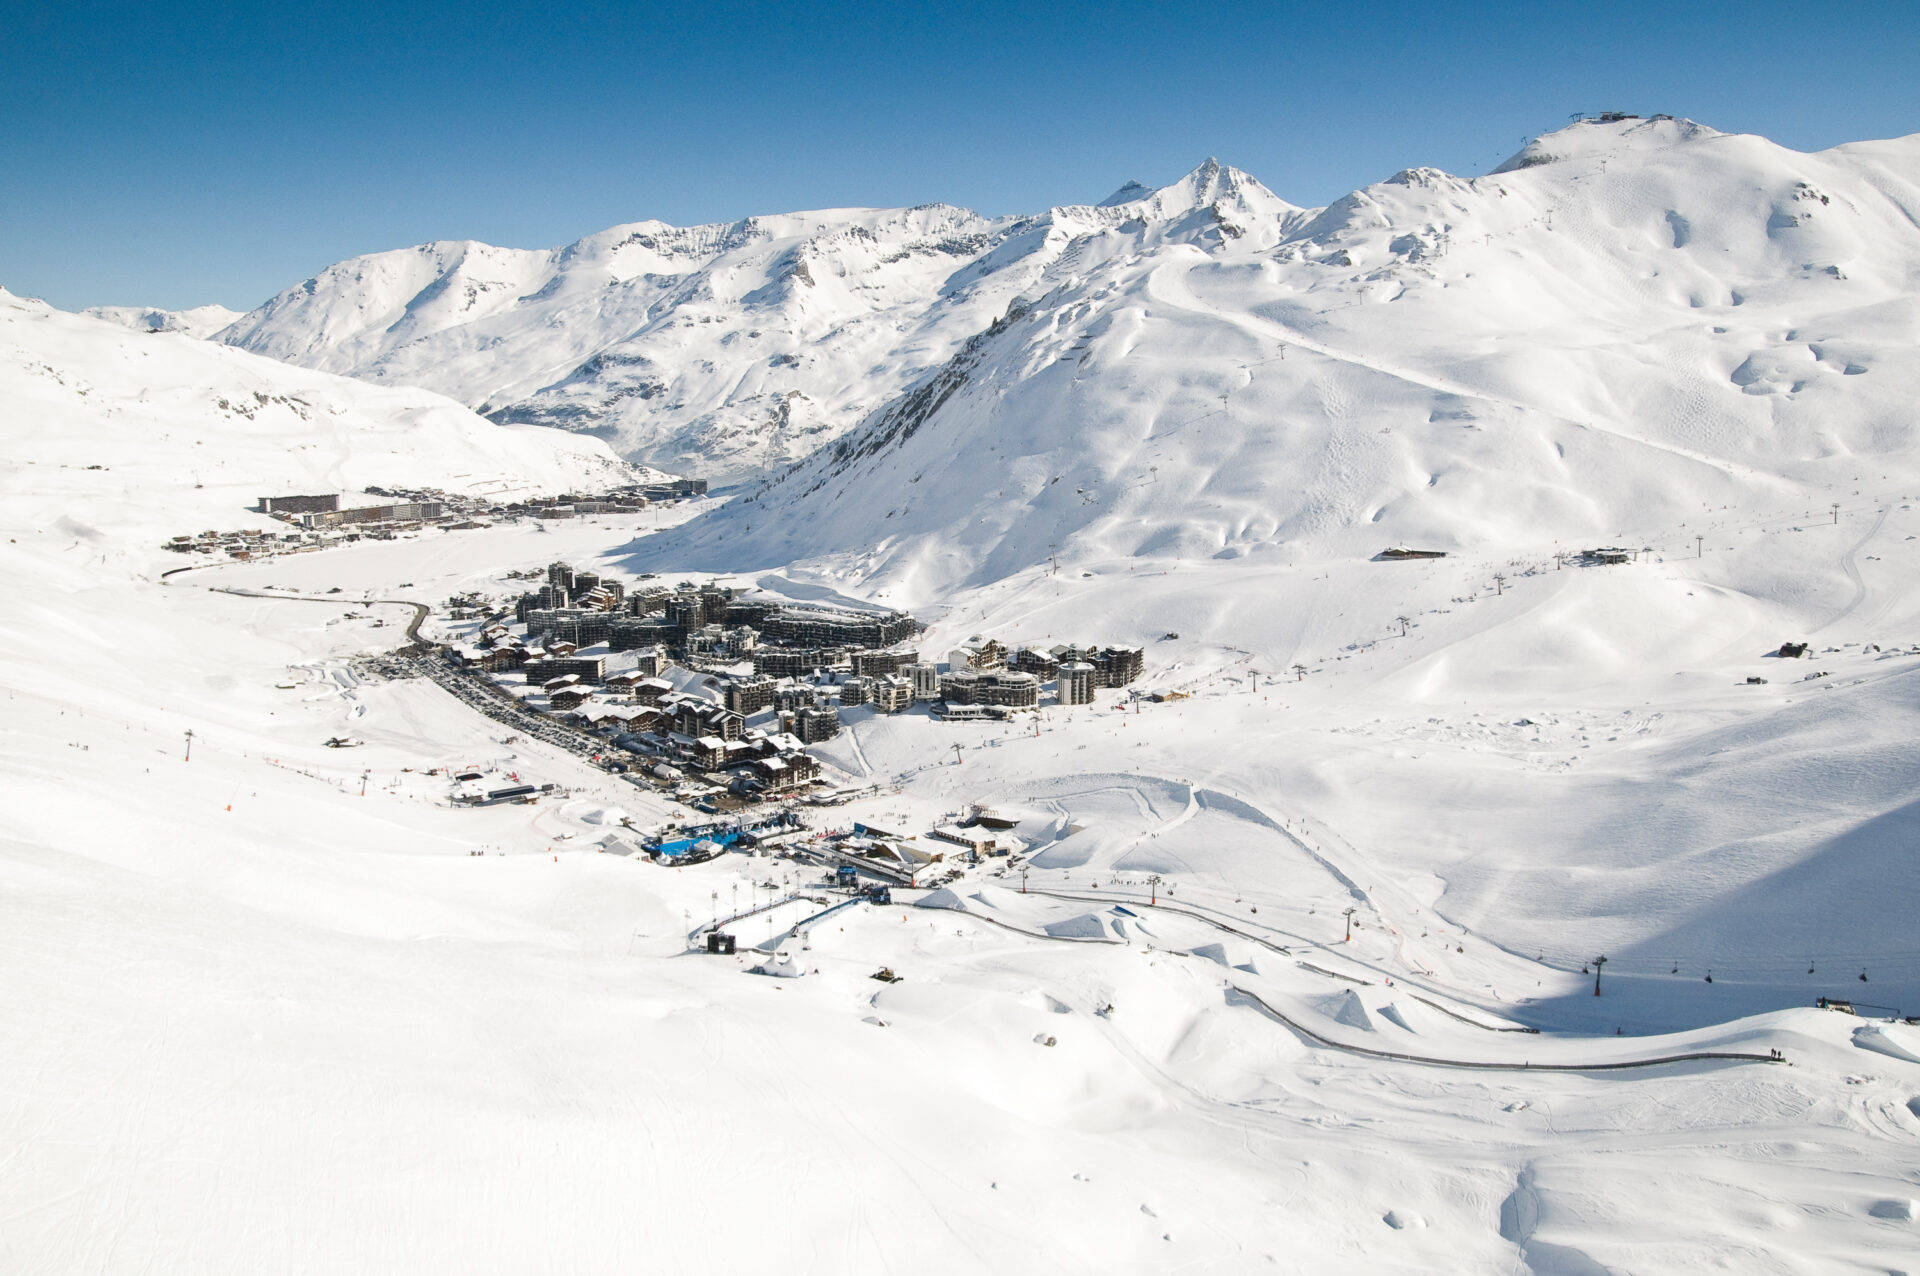 An image of the mountains surrounding Tignes